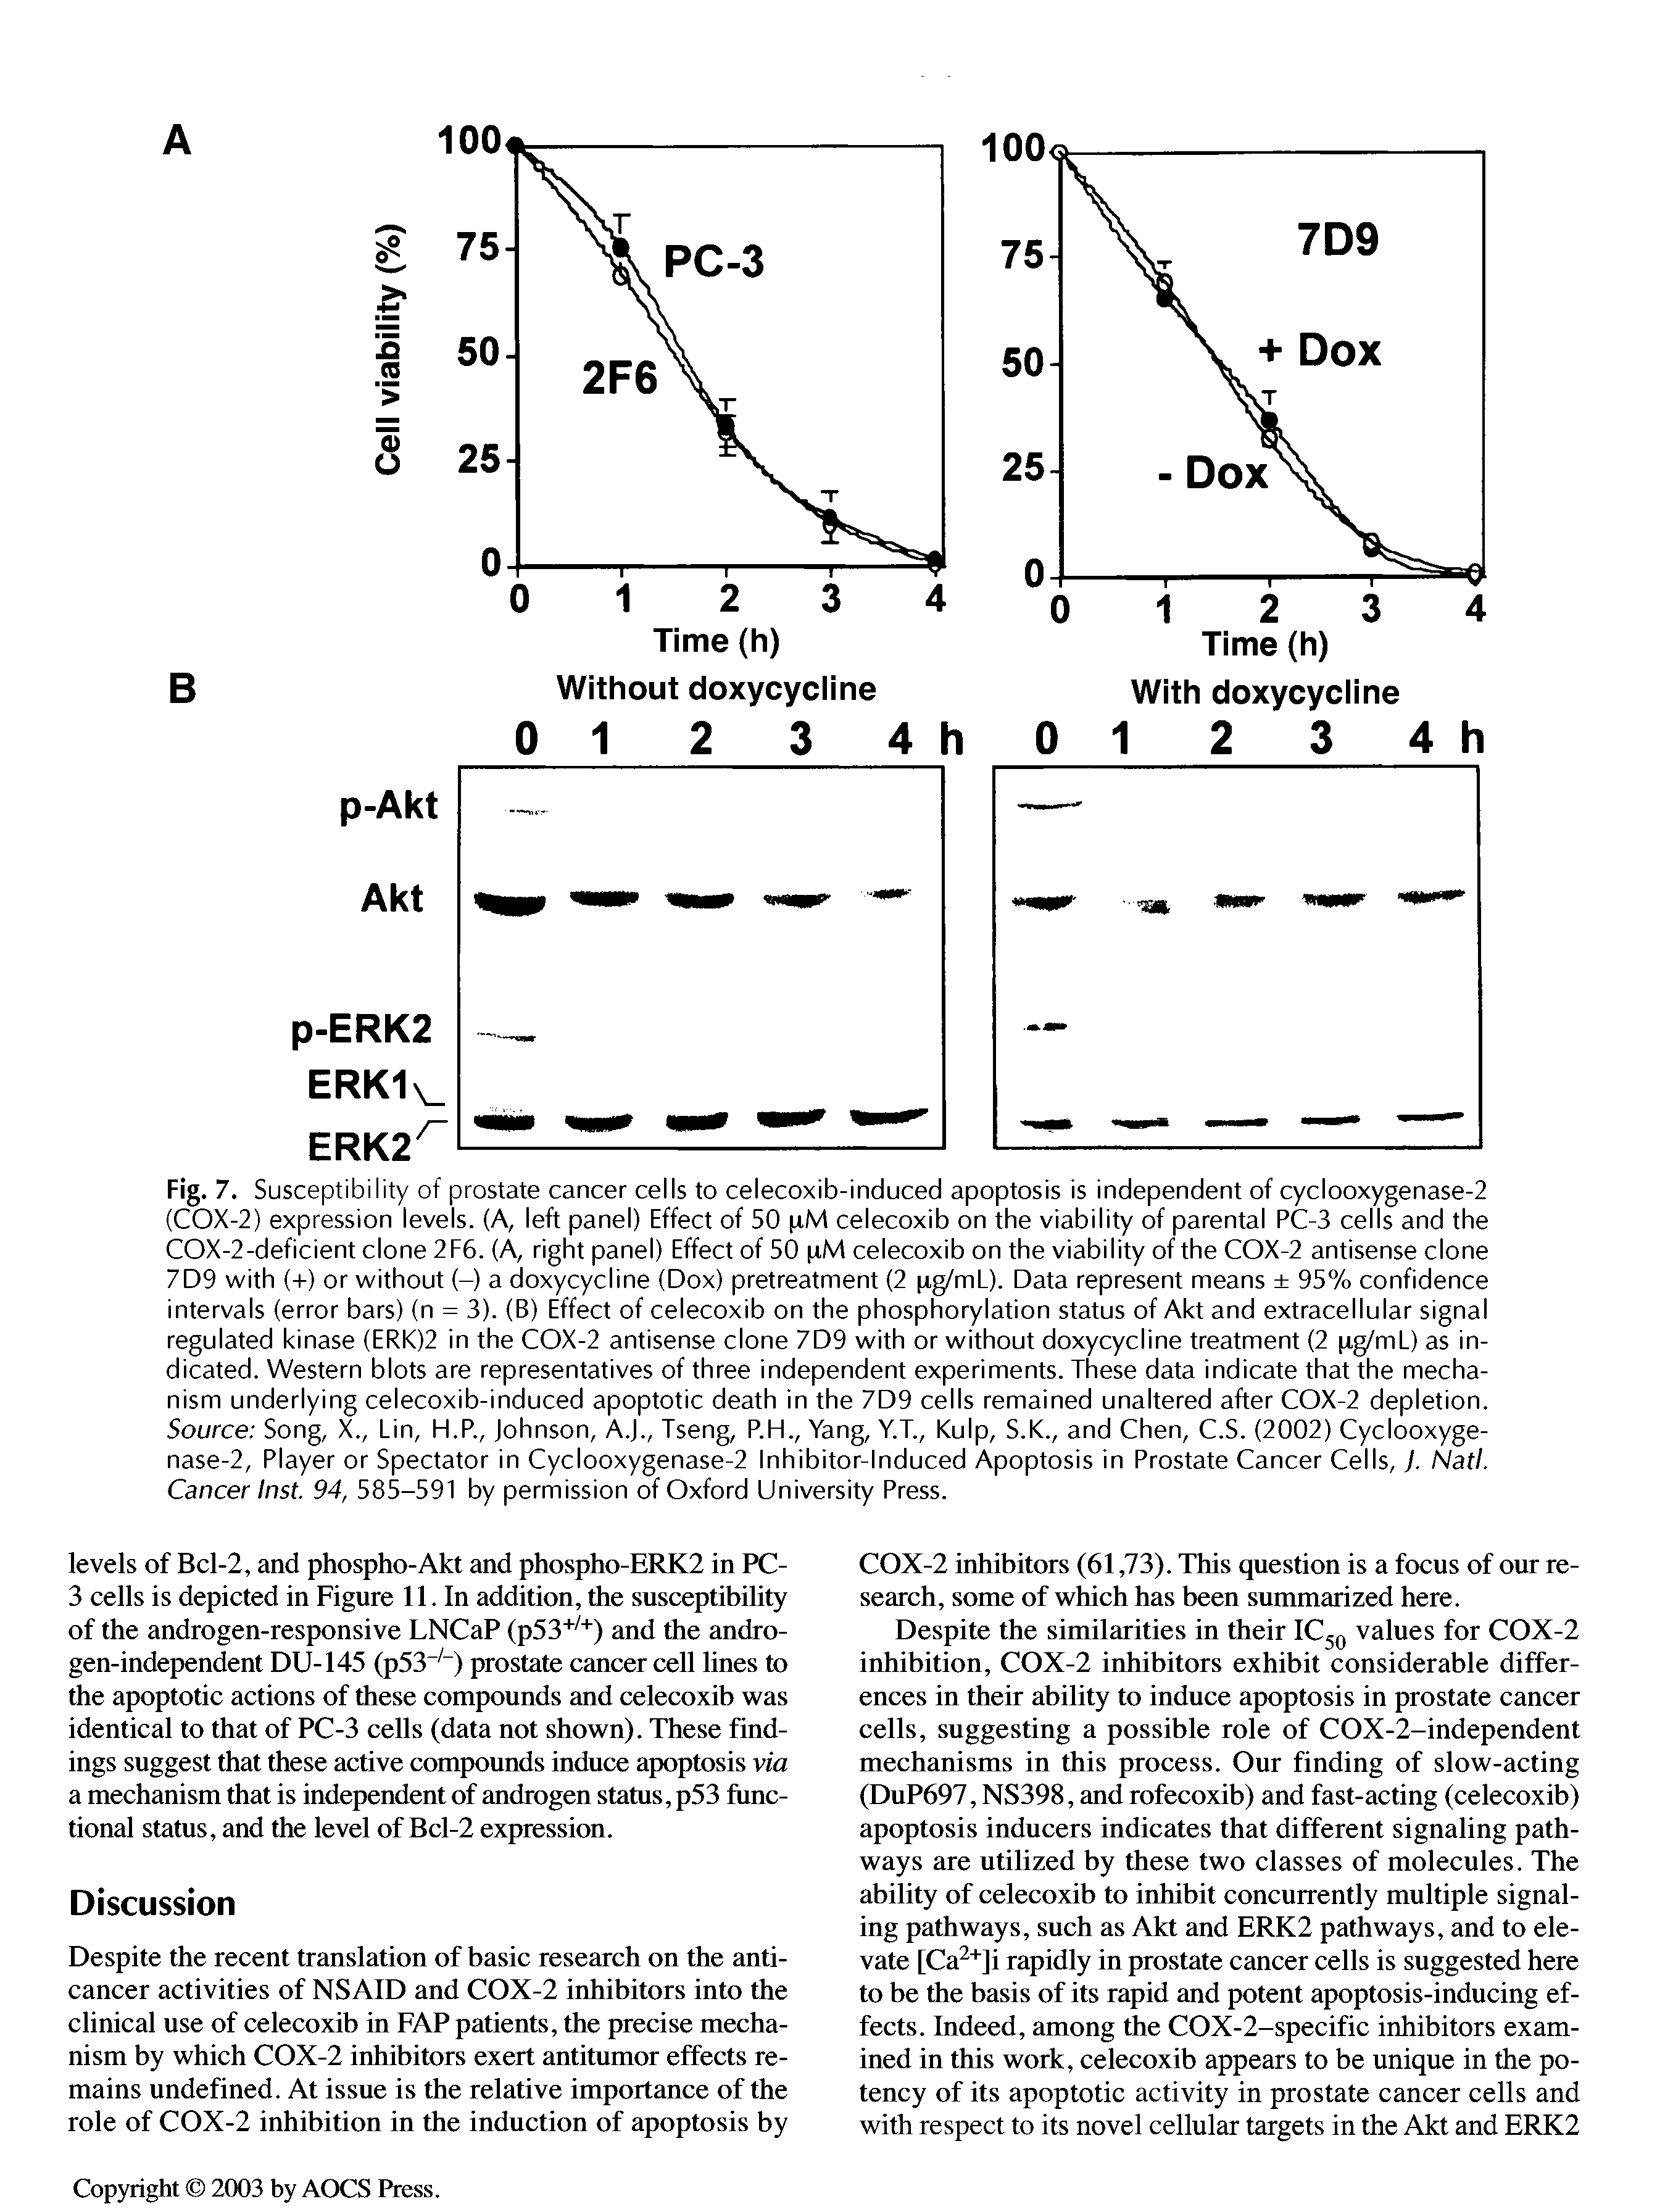 Fig. 7. Susceptibility of prostate cancer cells to celecoxib-induced apoptosis is independent of cyclooxygenase-2 (COX-2) expression levels. (A, left panel) Effect of 50 pM celecoxib on the viability of parental PC-3 cells and the COX-2-deficient clone 2 F6. (A, right panel) Effect of 50 pM celecoxib on the viability of the COX-2 antisense clone 7D9 with (+) or without (-) a doxycycline (Dox) pretreatment (2 pg/mL). Data represent means 95% confidence intervals (error bars) (n = 3). (B) Effect of celecoxib on the phosphorylation status of Akt and extracellular signal regulated kinase (ERK)2 in the COX-2 antisense clone 7D9 with or without doxycycline treatment (2 pg/mL) as indicated. Western blots are representatives of three independent experiments. These data indicate that the mechanism underlying celecoxib-induced apoptotic death in the 7D9 cells remained unaltered after COX-2 depletion. Source Song, X., Lin, H.P., Johnson, A.J., Tseng, P.H., Yang, Y.T., Kulp, S.K., and Chen, C.S. (2002) Cyclooxygenase-2, Player or Spectator in Cyclooxygenase-2 Inhibitor-Induced Apoptosis in Prostate Cancer Cells, j. Natl. Cancer Inst. 94, 585-591 by permission of Oxford University Press.